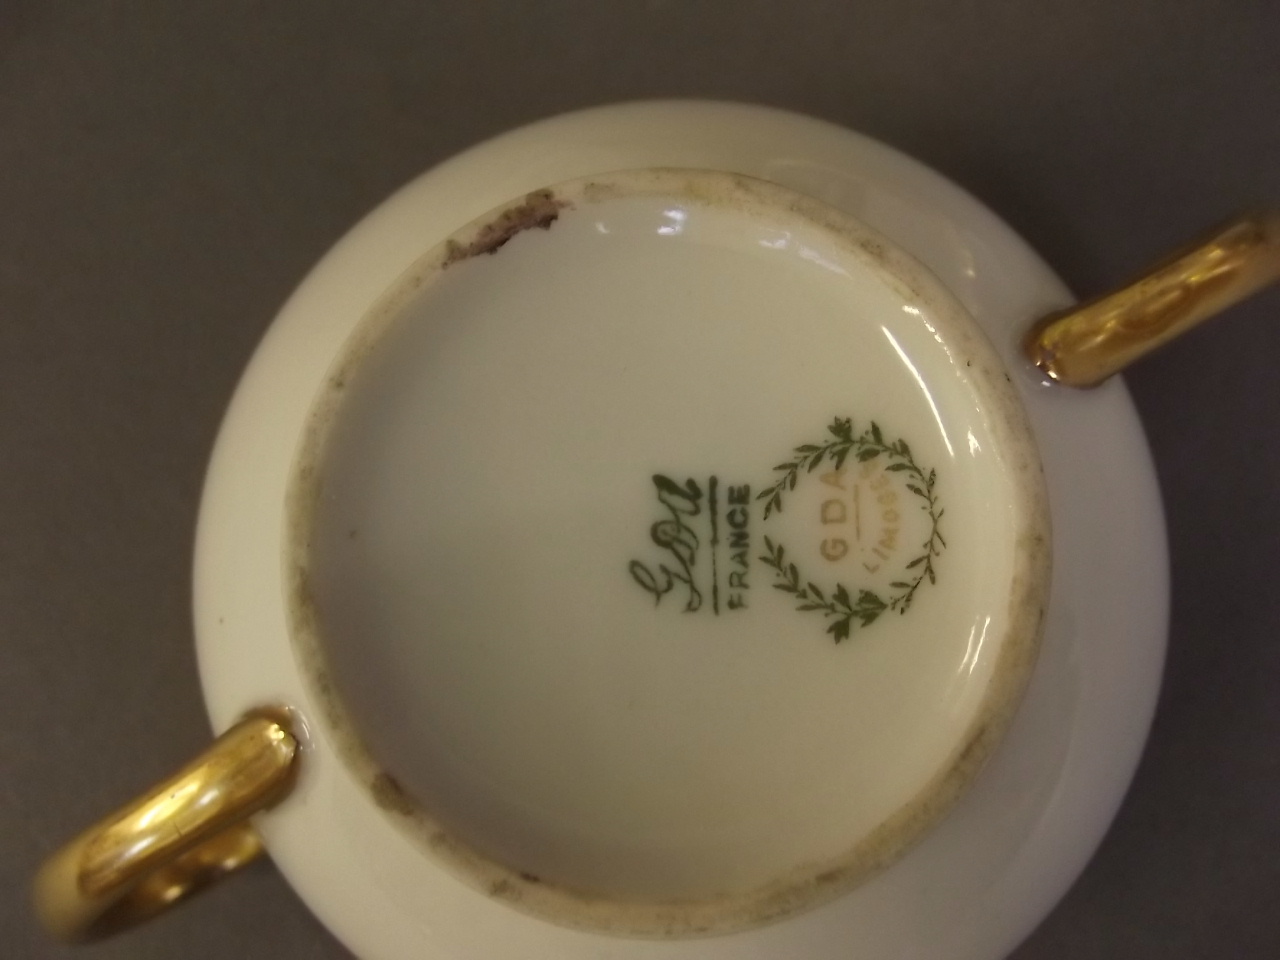 A set of 6 Limoges porcelain twin handled cups decorated in black and gilt with exotic birds - Image 3 of 3